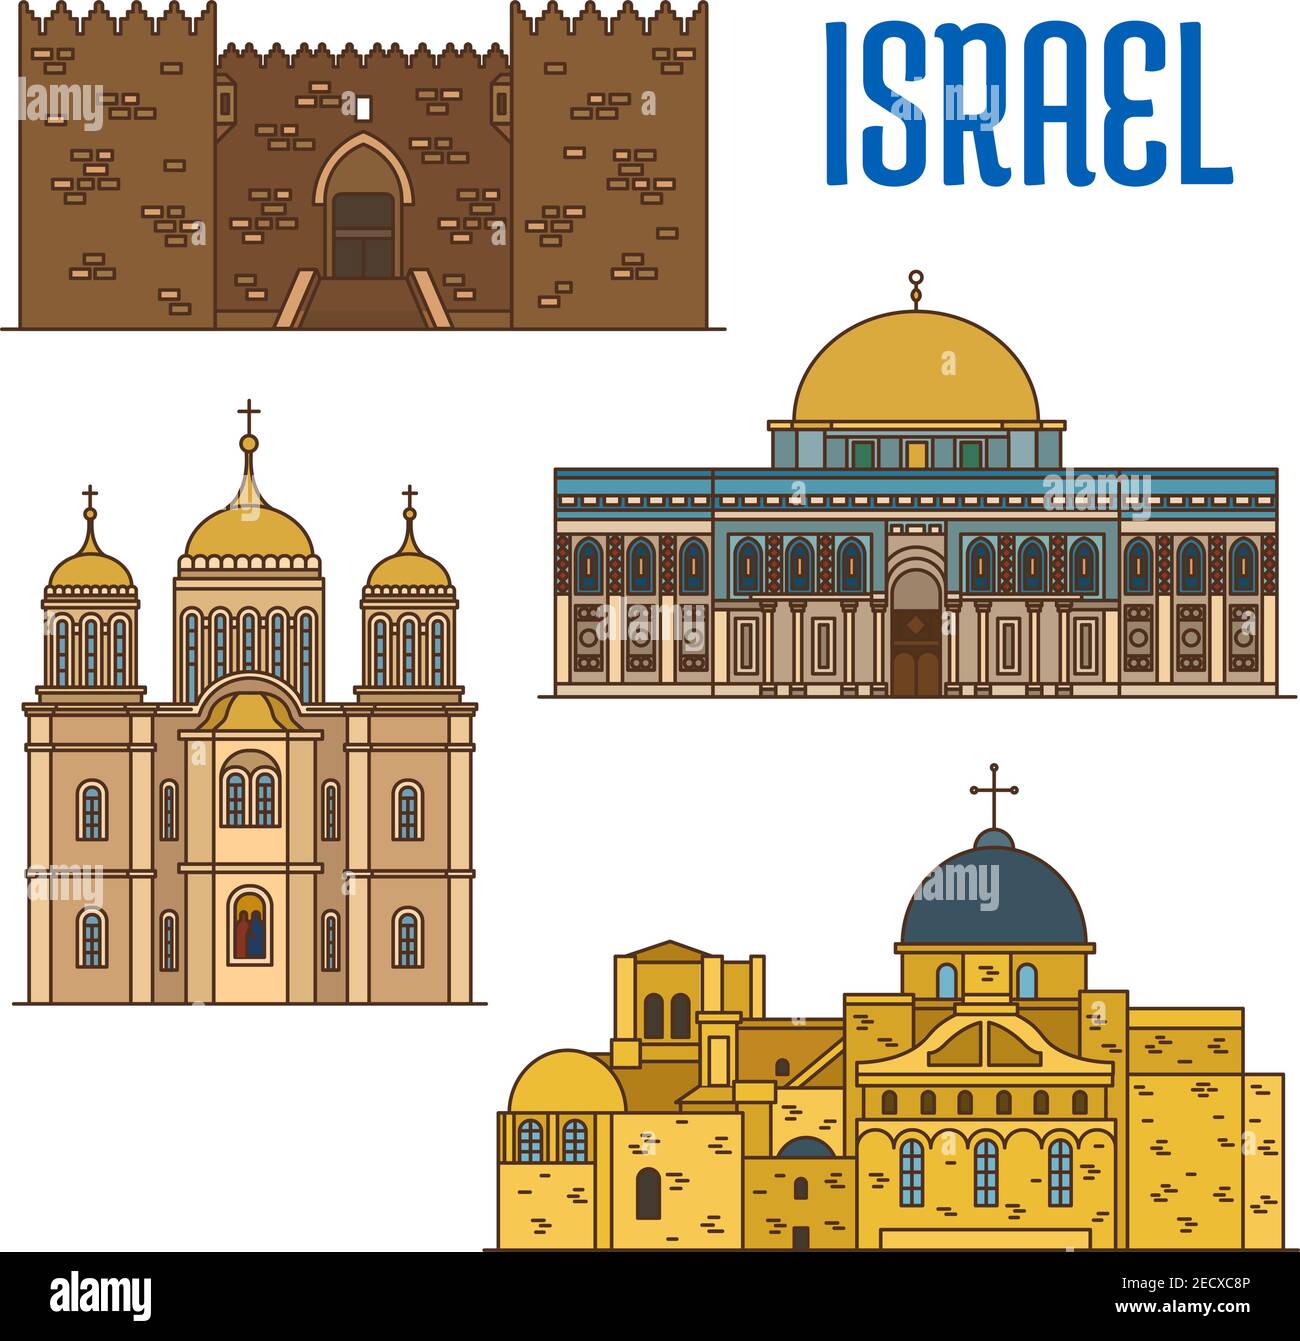 Israel vector detailed architecture icons of Damascus Gate, Al-Aqsa Mosque, Monastery Ein Karem, Church of the Holy Sepulchre. Israeli showplaces symb Stock Vector